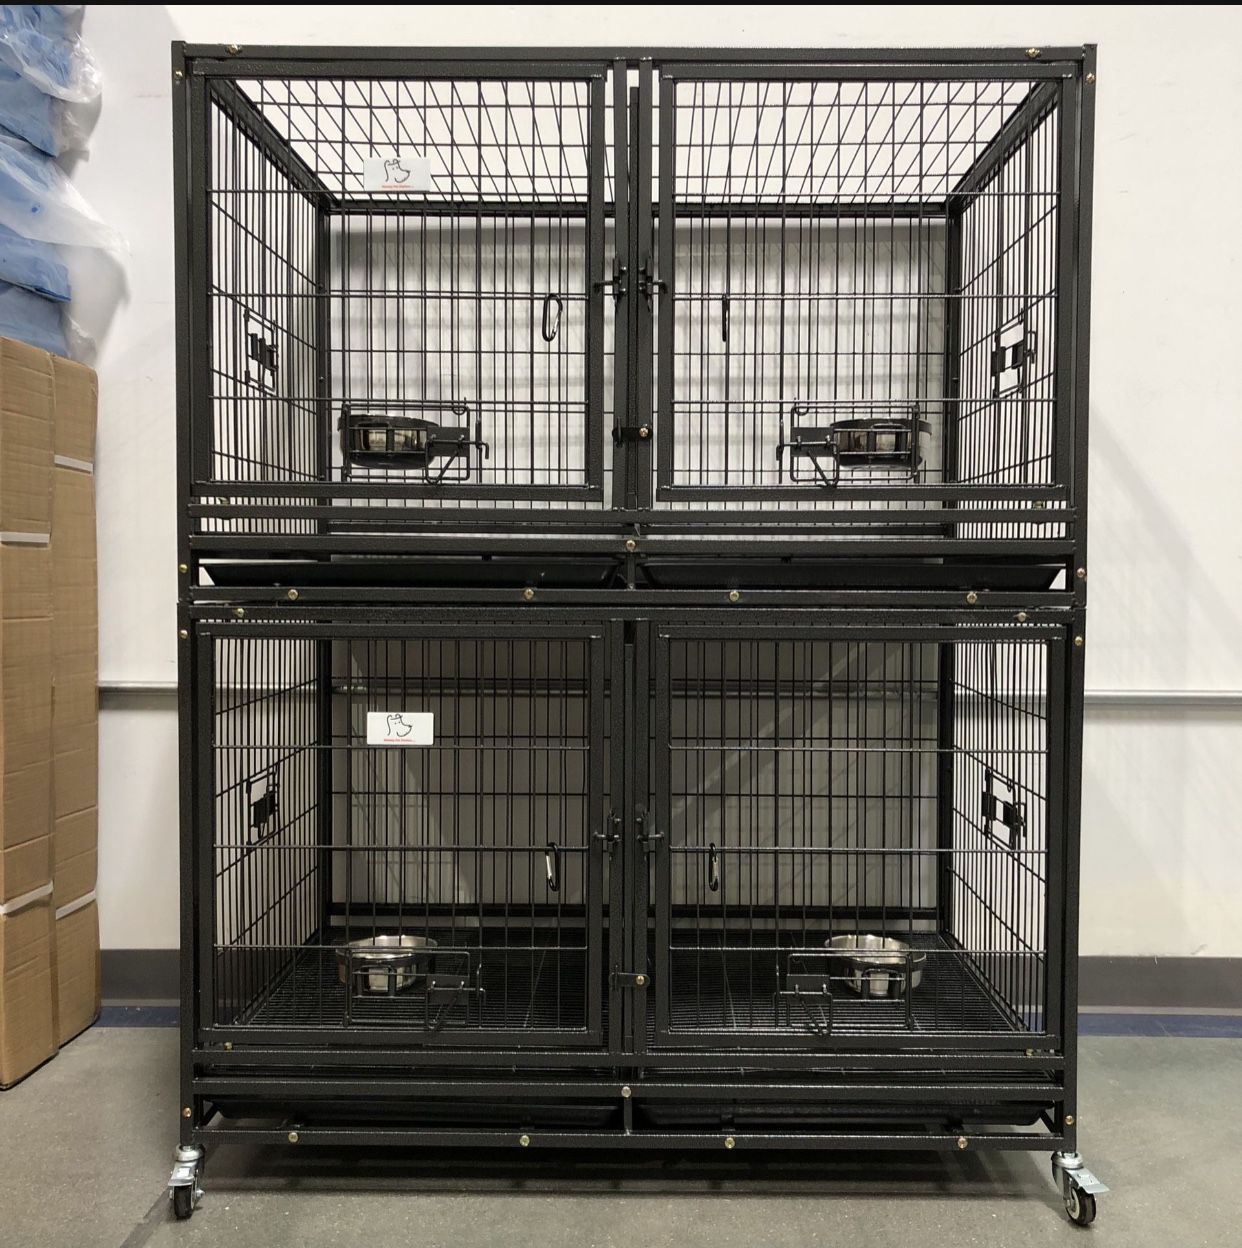 New 🔳🔳Double Tier HD Sleek 43” Kennel Crate Cage 🐩🐕🦮🐕‍🦺W/ Removable Divider, Bowls, Trays & Casters 🐶 Dimensions each level: 43”L X 28”W X 26”